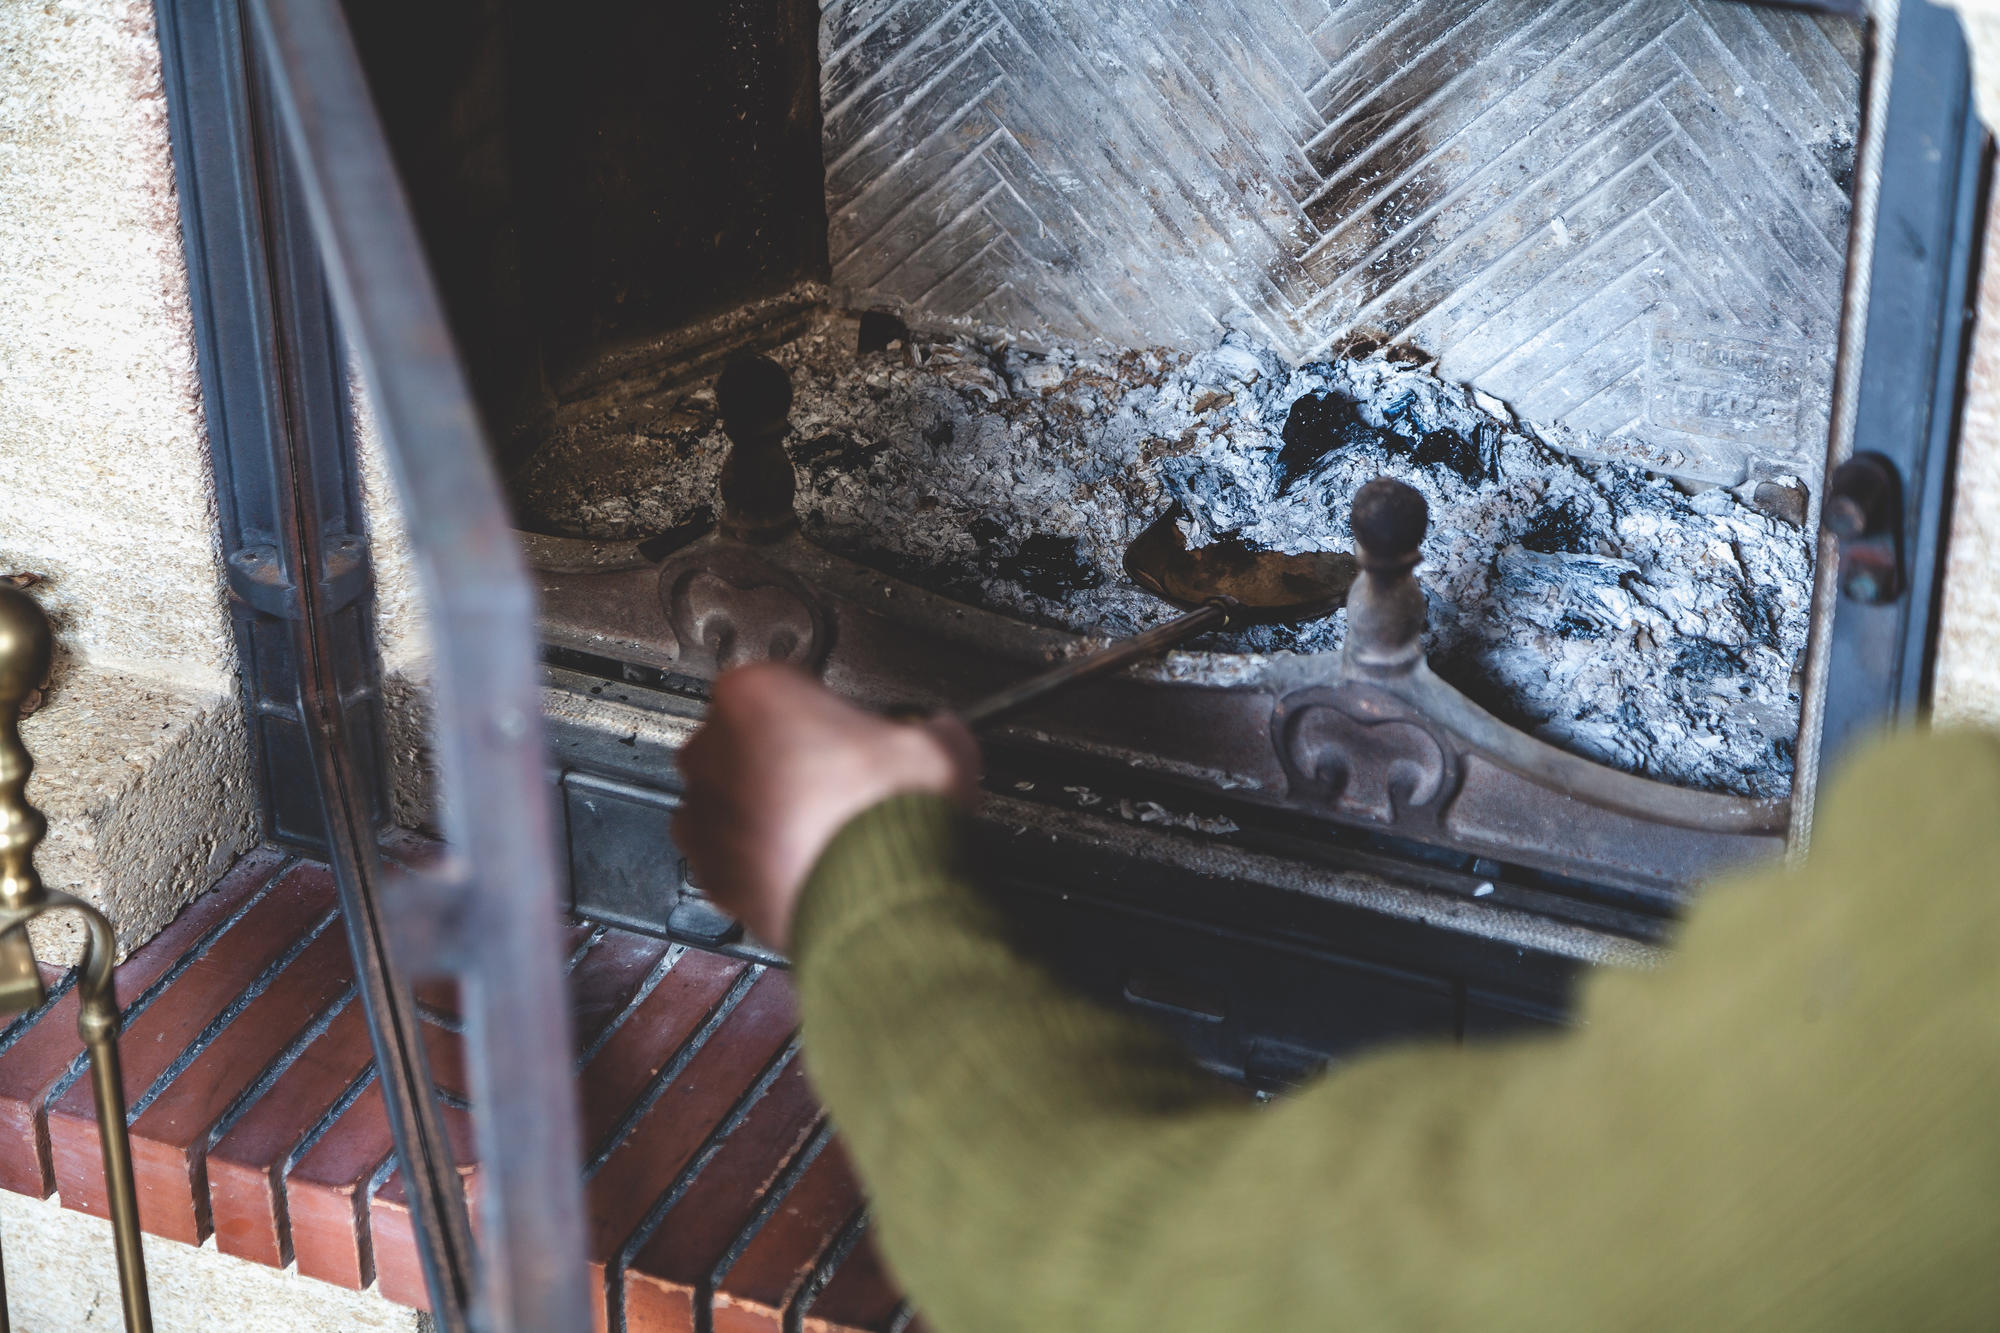 A person poking around ash in a fireplace.